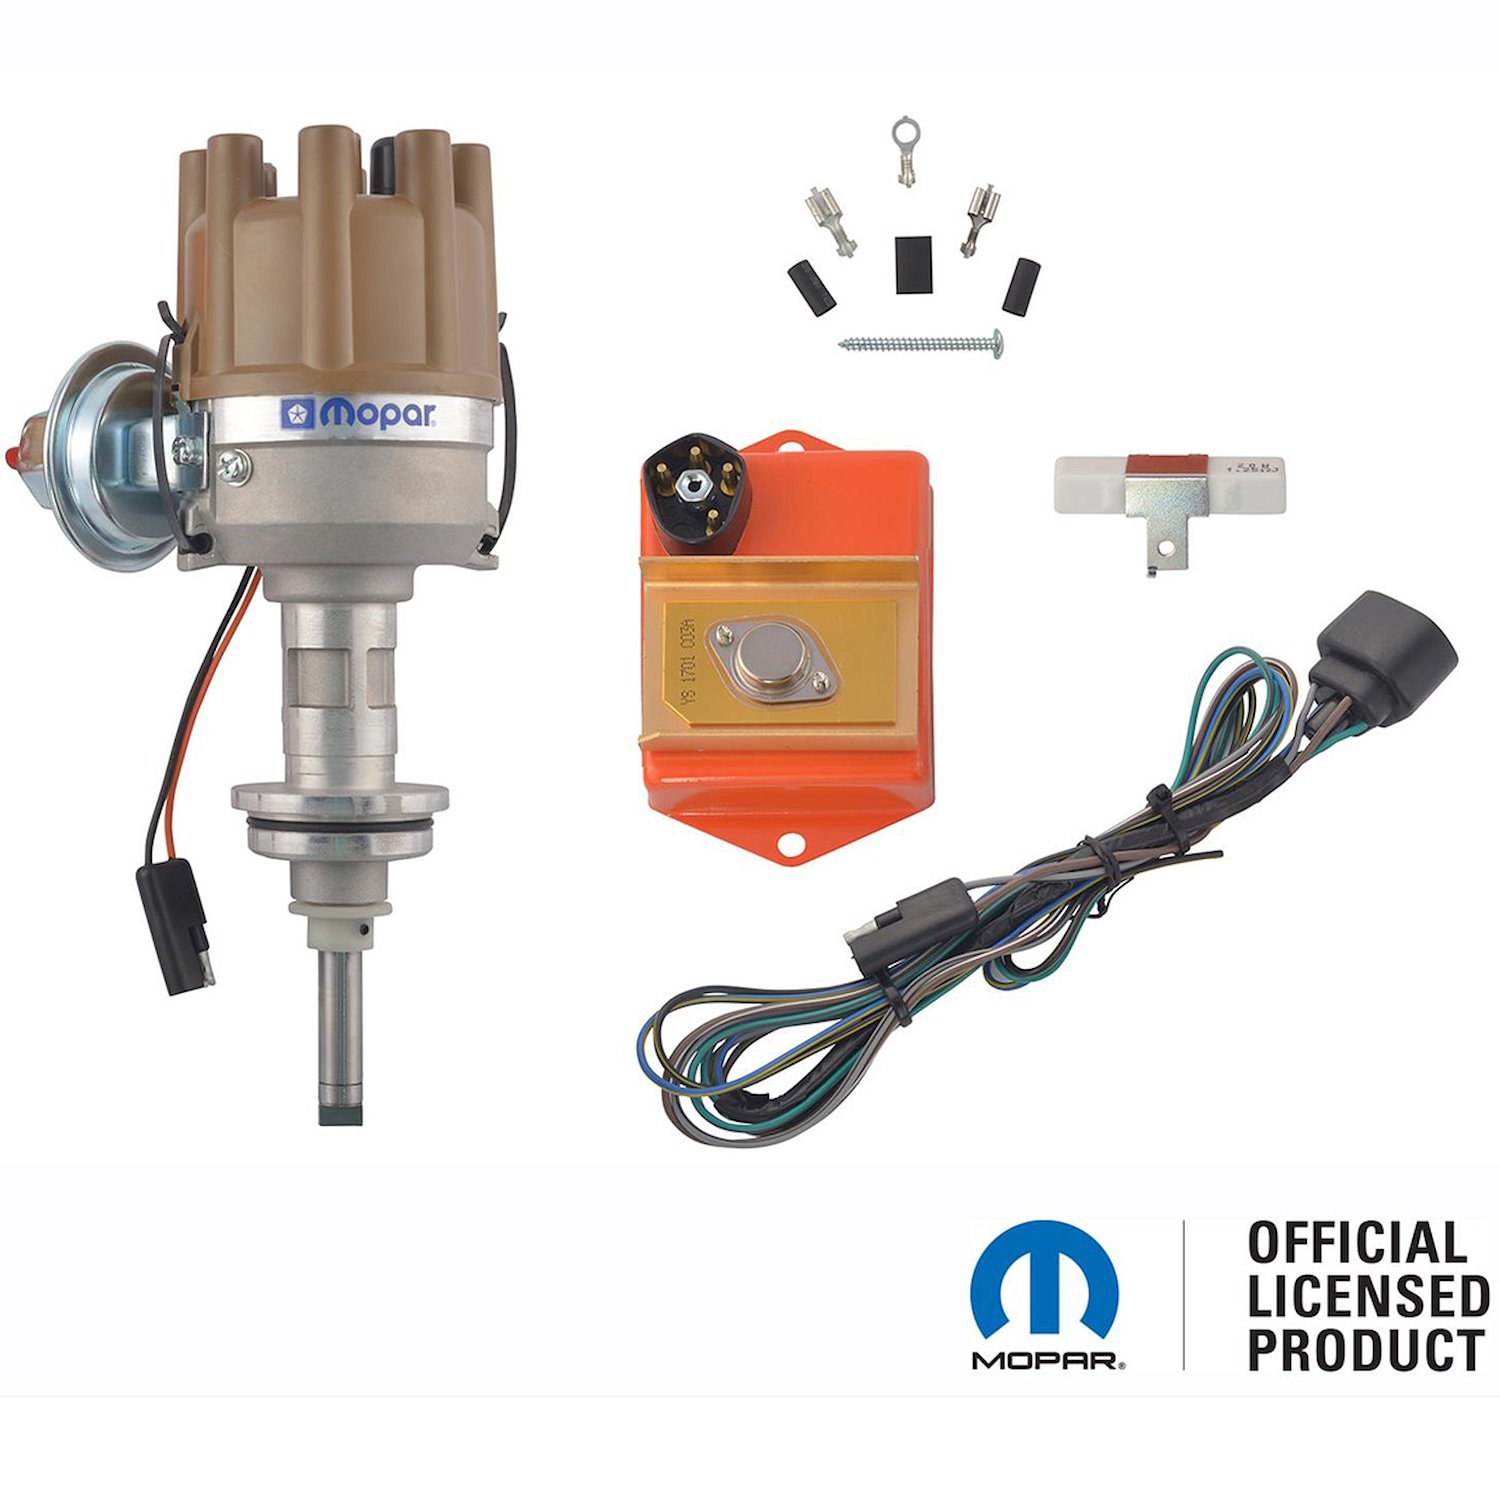 Officially Licensed Electronic Distributor Conversion Kits